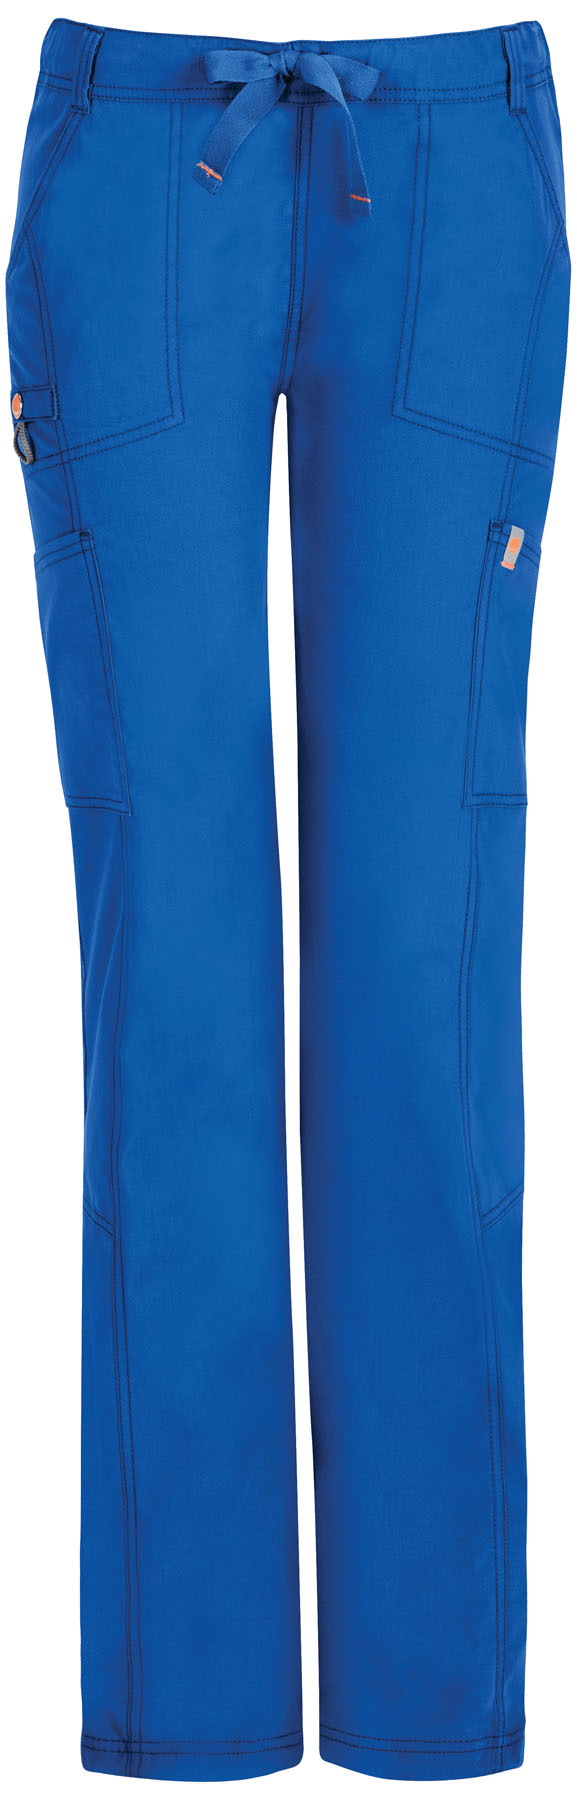 Code Happy Medical Bliss w/ Certainty Plus 46000AB Low Rise Straight Leg Drawstring Pant-Code Happy